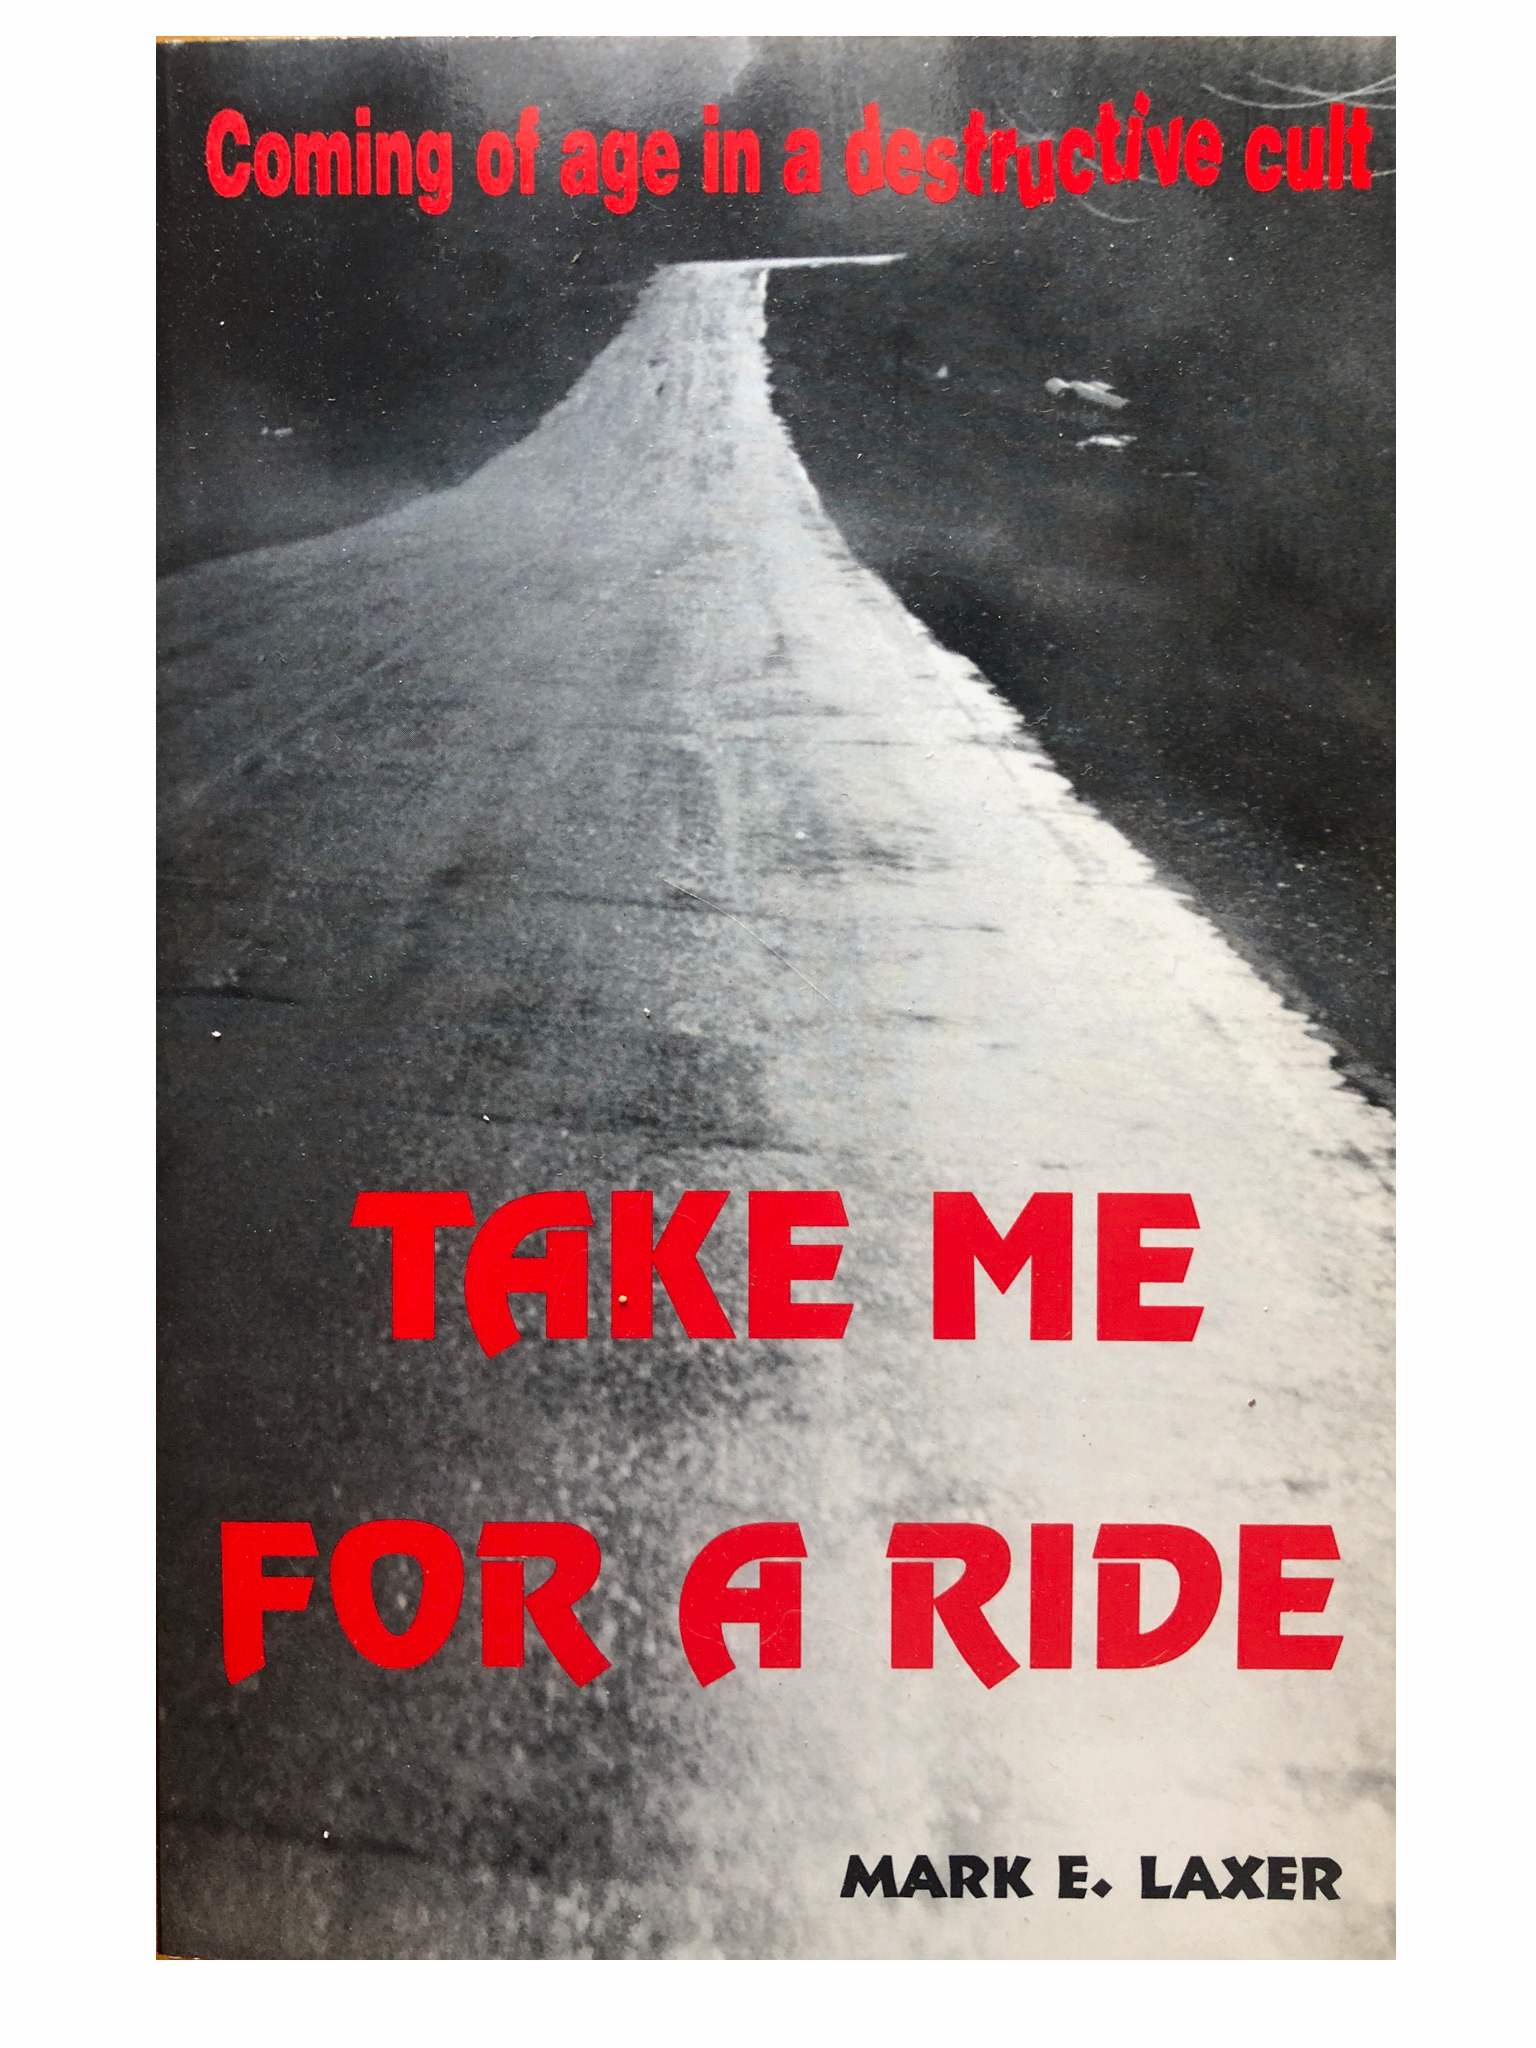 Take Me for a Ride: Coming of Age in a Destructive Cult